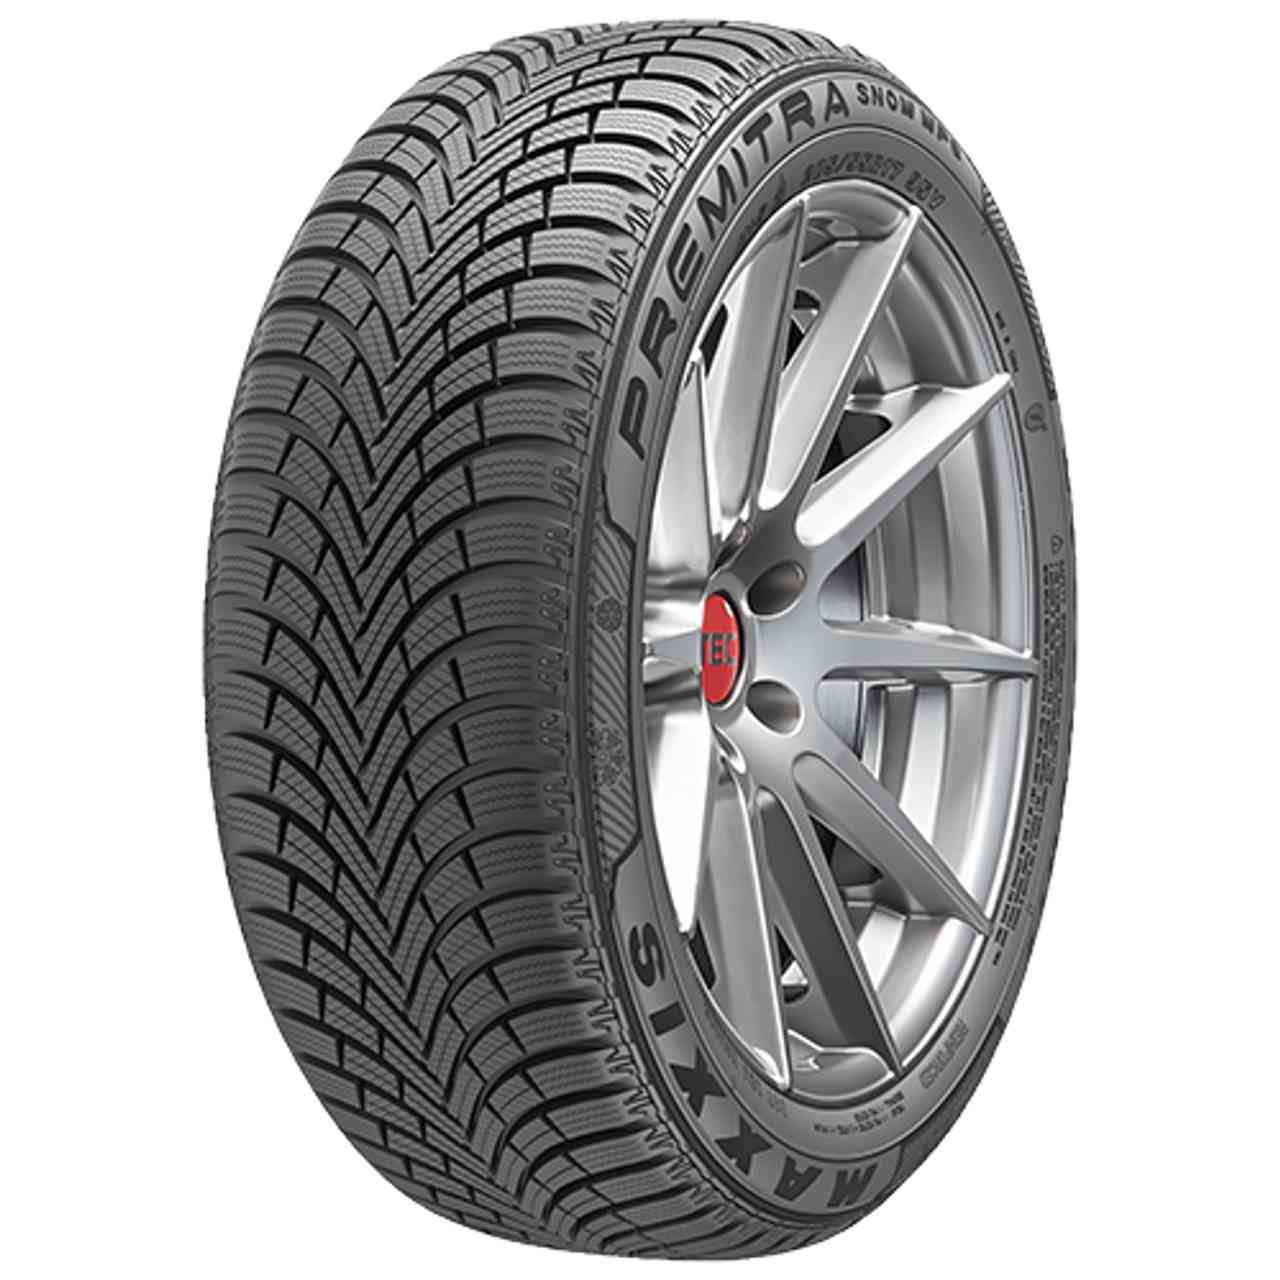 MAXXIS PREMITRA SNOW WP6 185/60R15 88T BSW